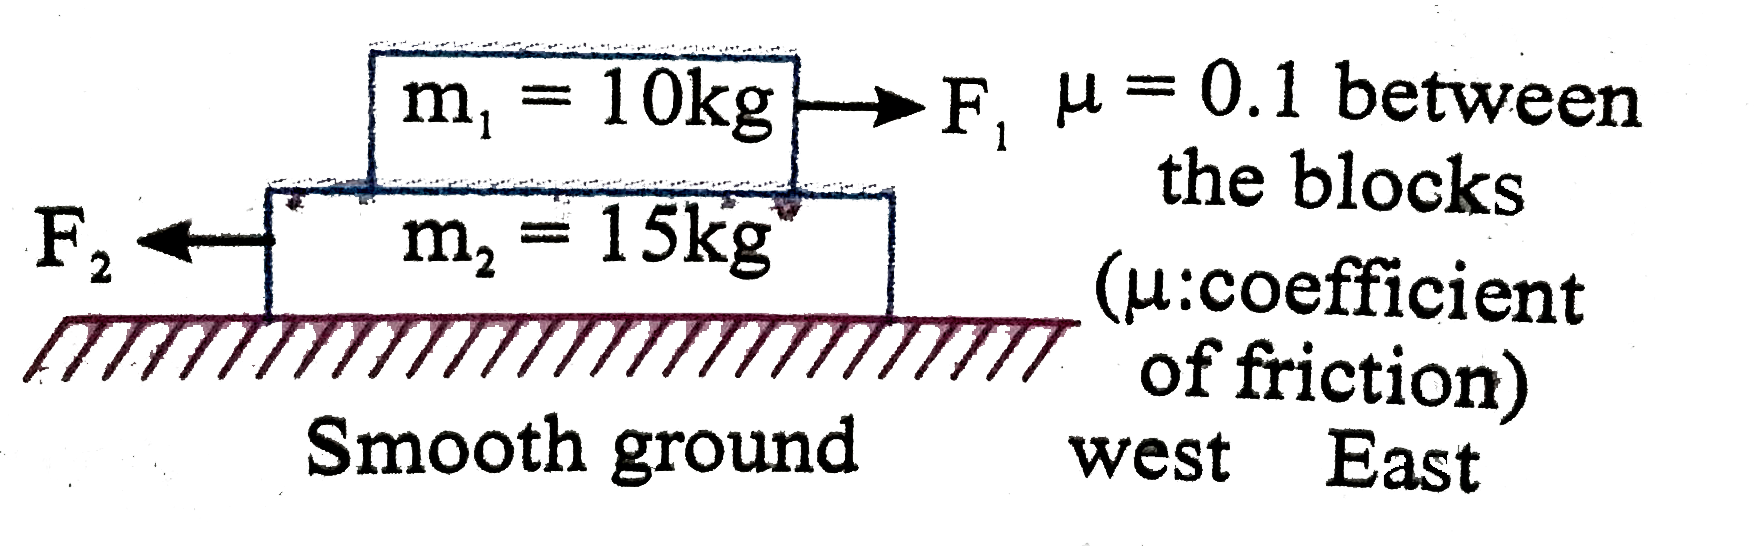 In the diagram shown the ground is smooth and F(1) & F(2) are both horizontal forces. The mass of the upper blocks is 10 kg while that of lower block is 15  kg. The correct statement is: